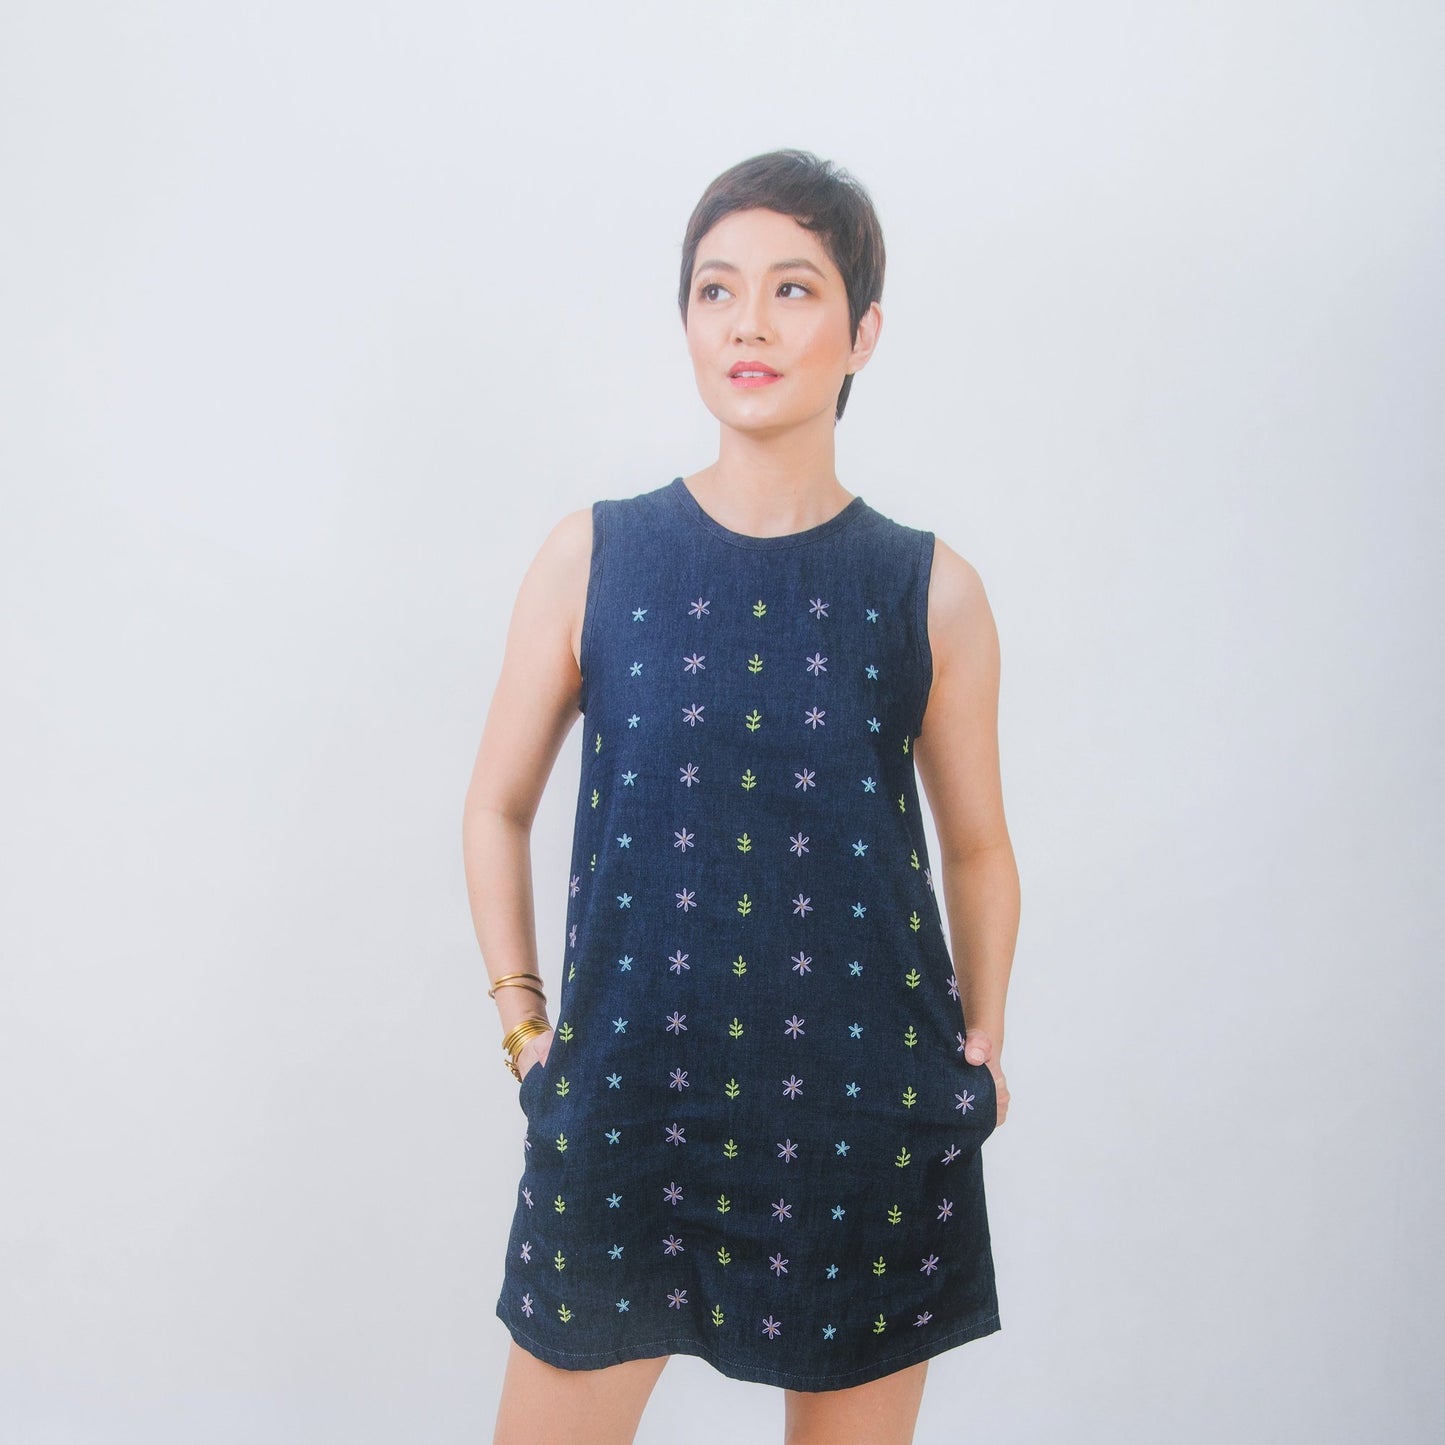 Hand-embroidered shift dress in denim